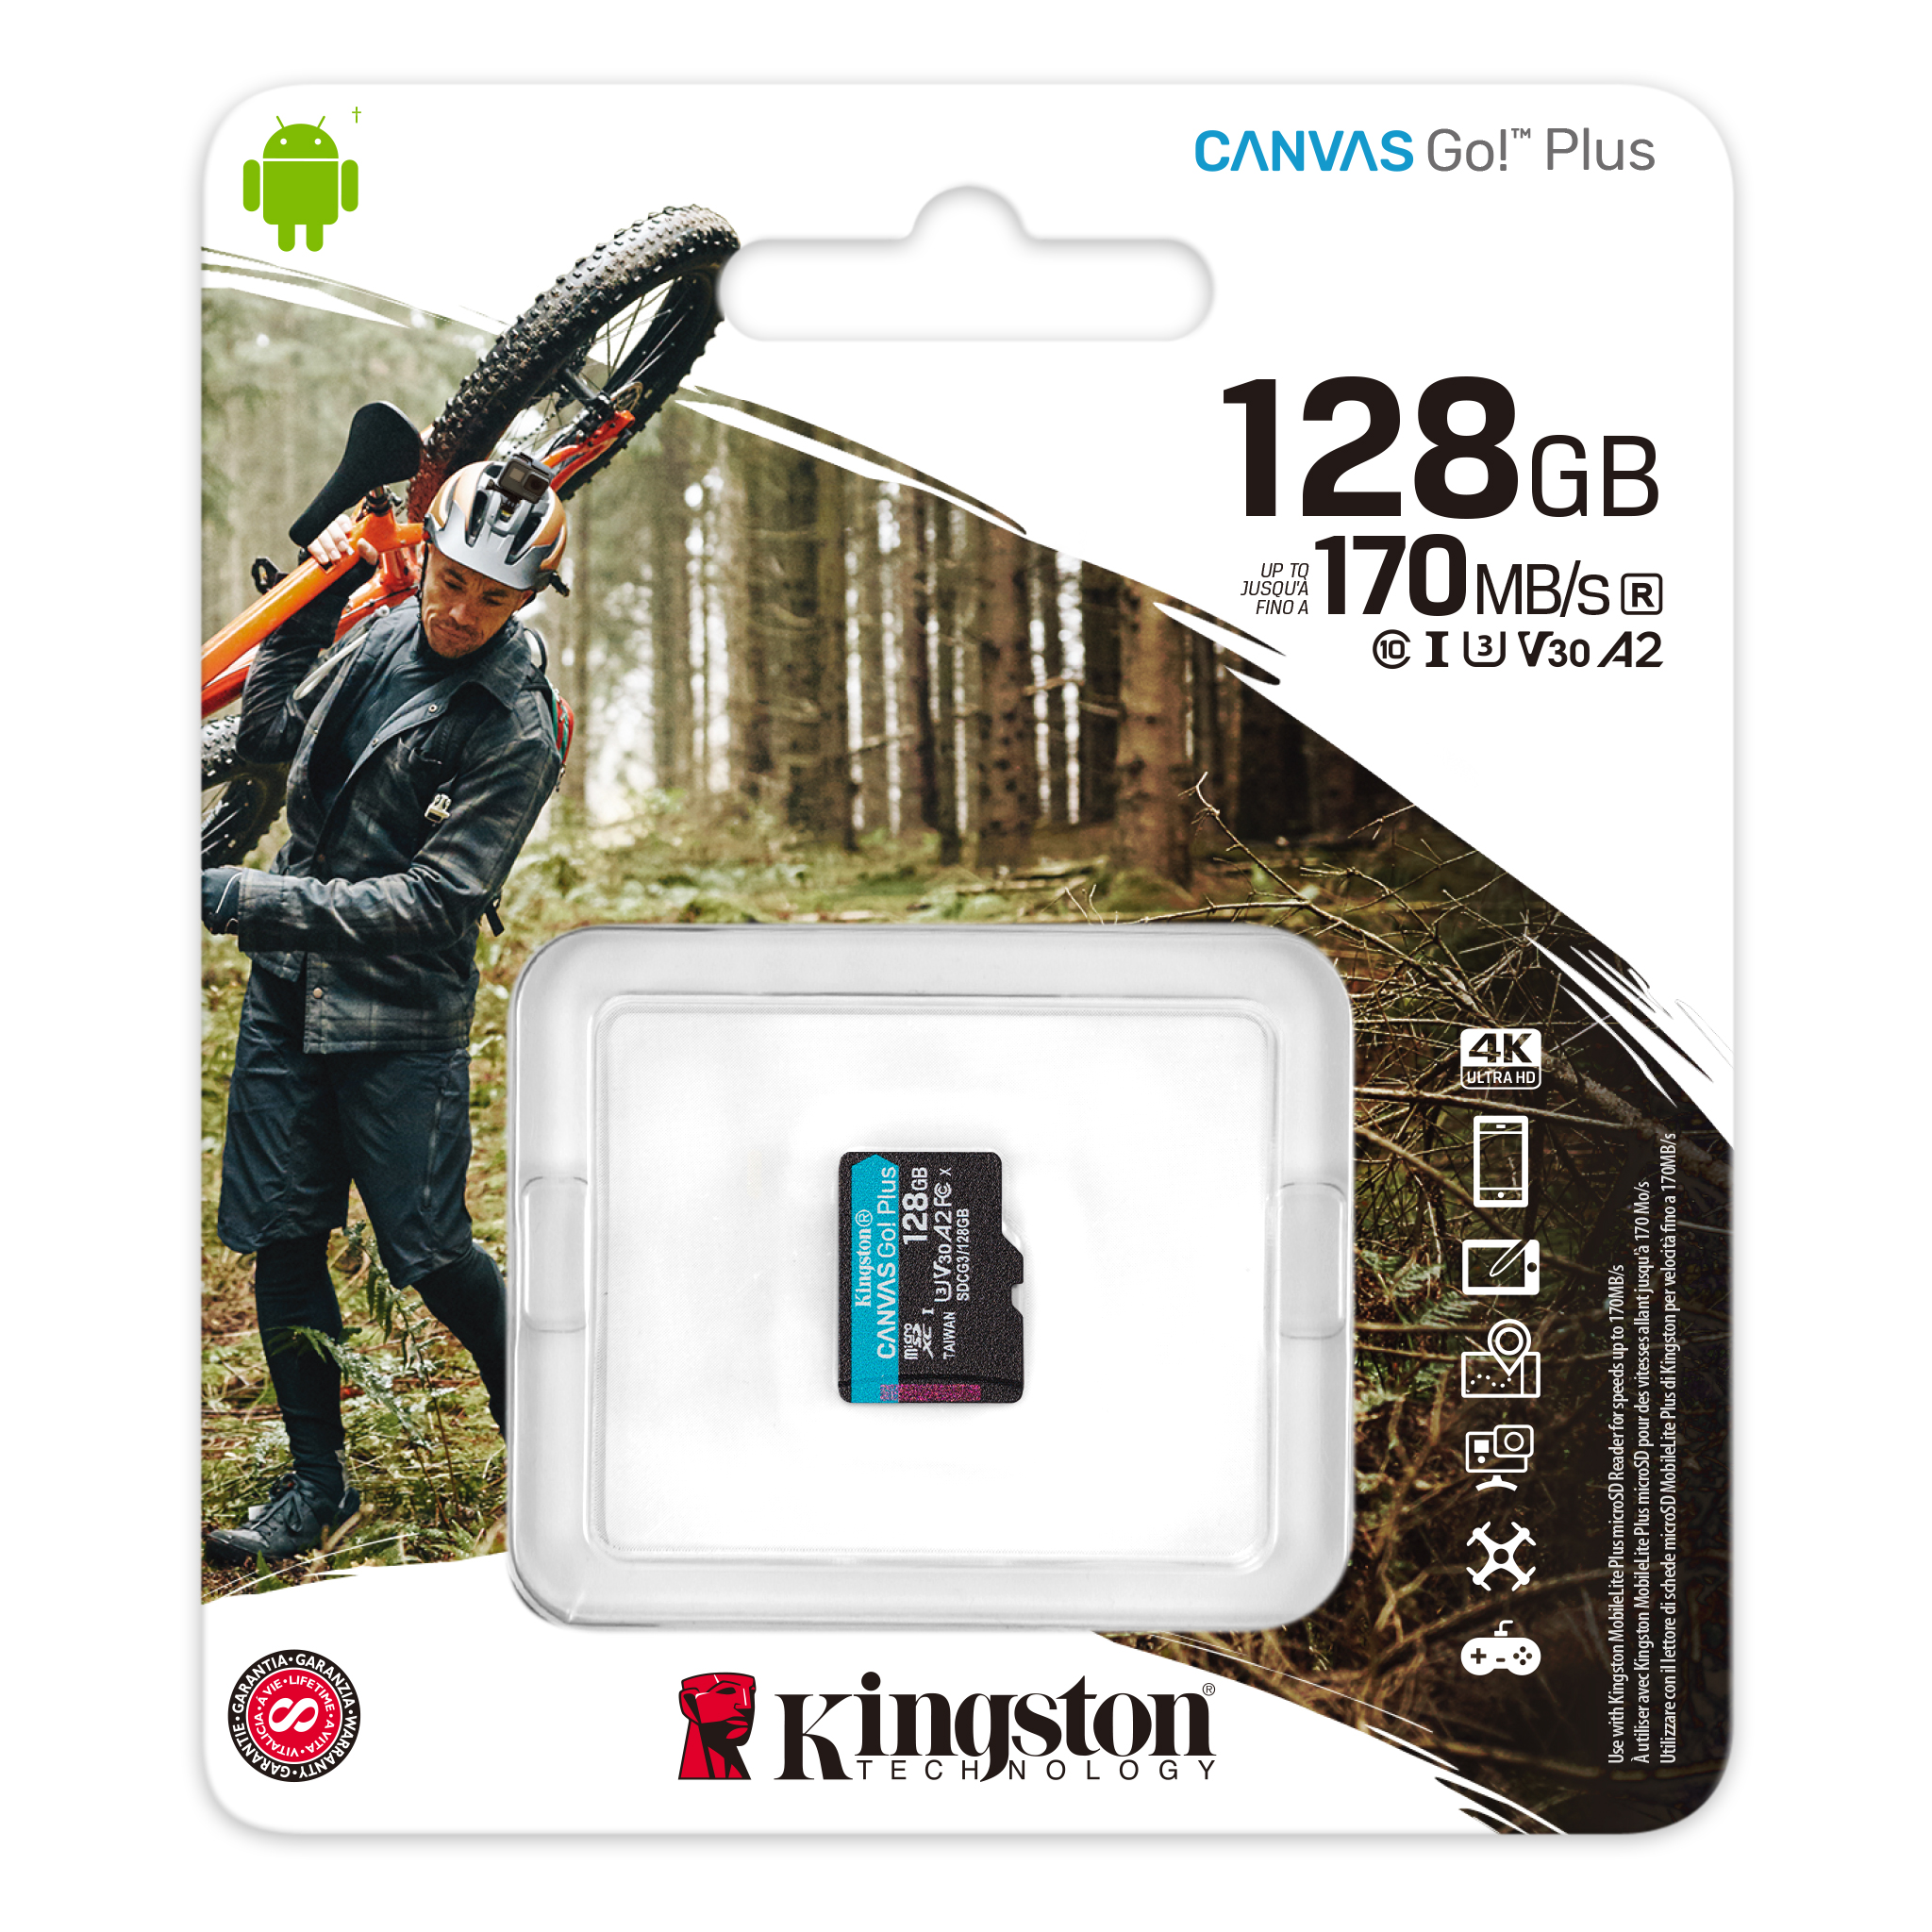 Professional Kingston 512GB for LG D725 MicroSDXC Card Custom Verified by SanFlash. 80MBs Works with Kingston